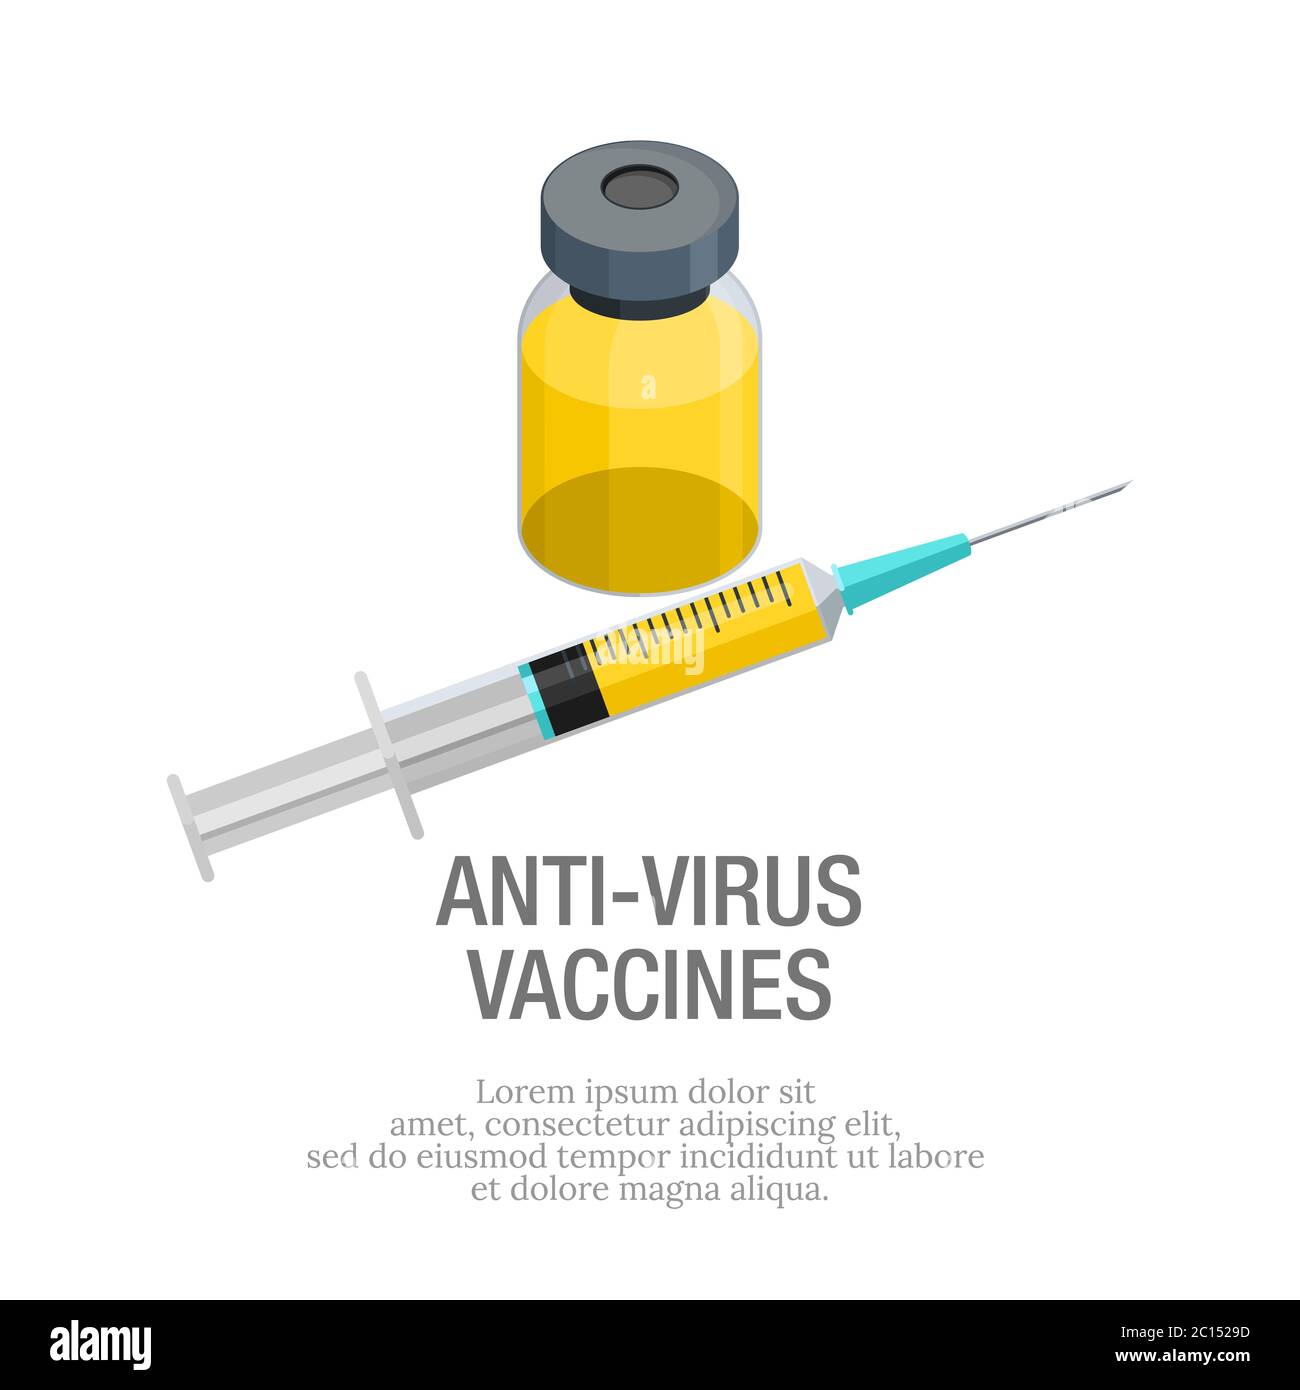 Vector illustration of anti-virus liquid in bottles and syringes. Suitable for design elements of immunization activities. antibodies for patient. Stock Vector